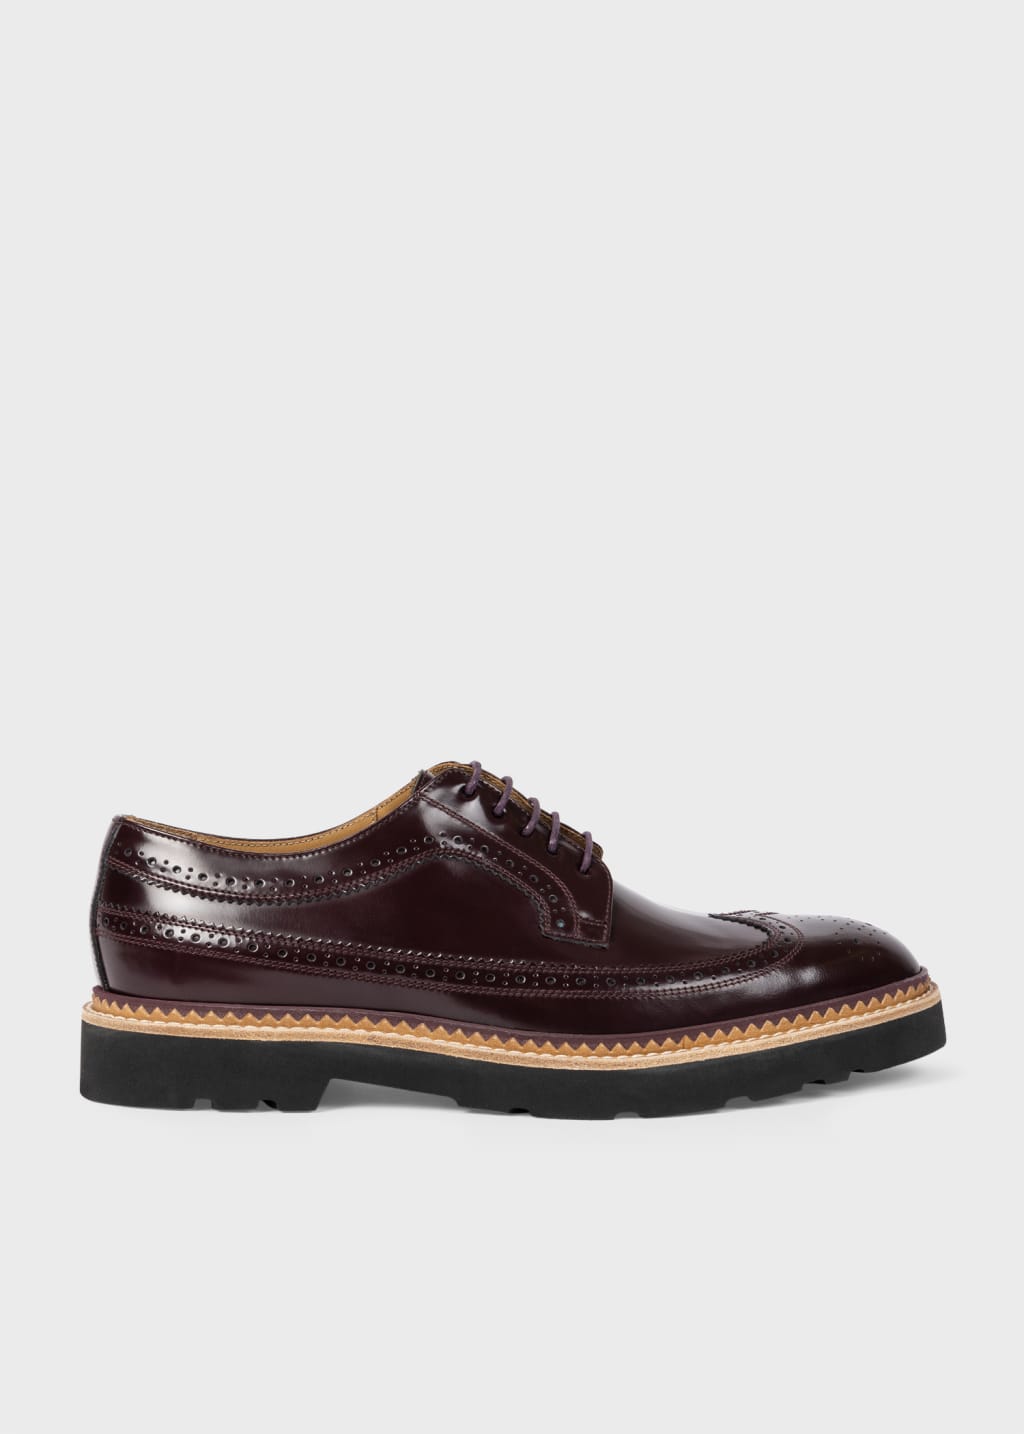 Detail View - Bordeaux High-Shine Leather 'Count' Brogues Paul Smith